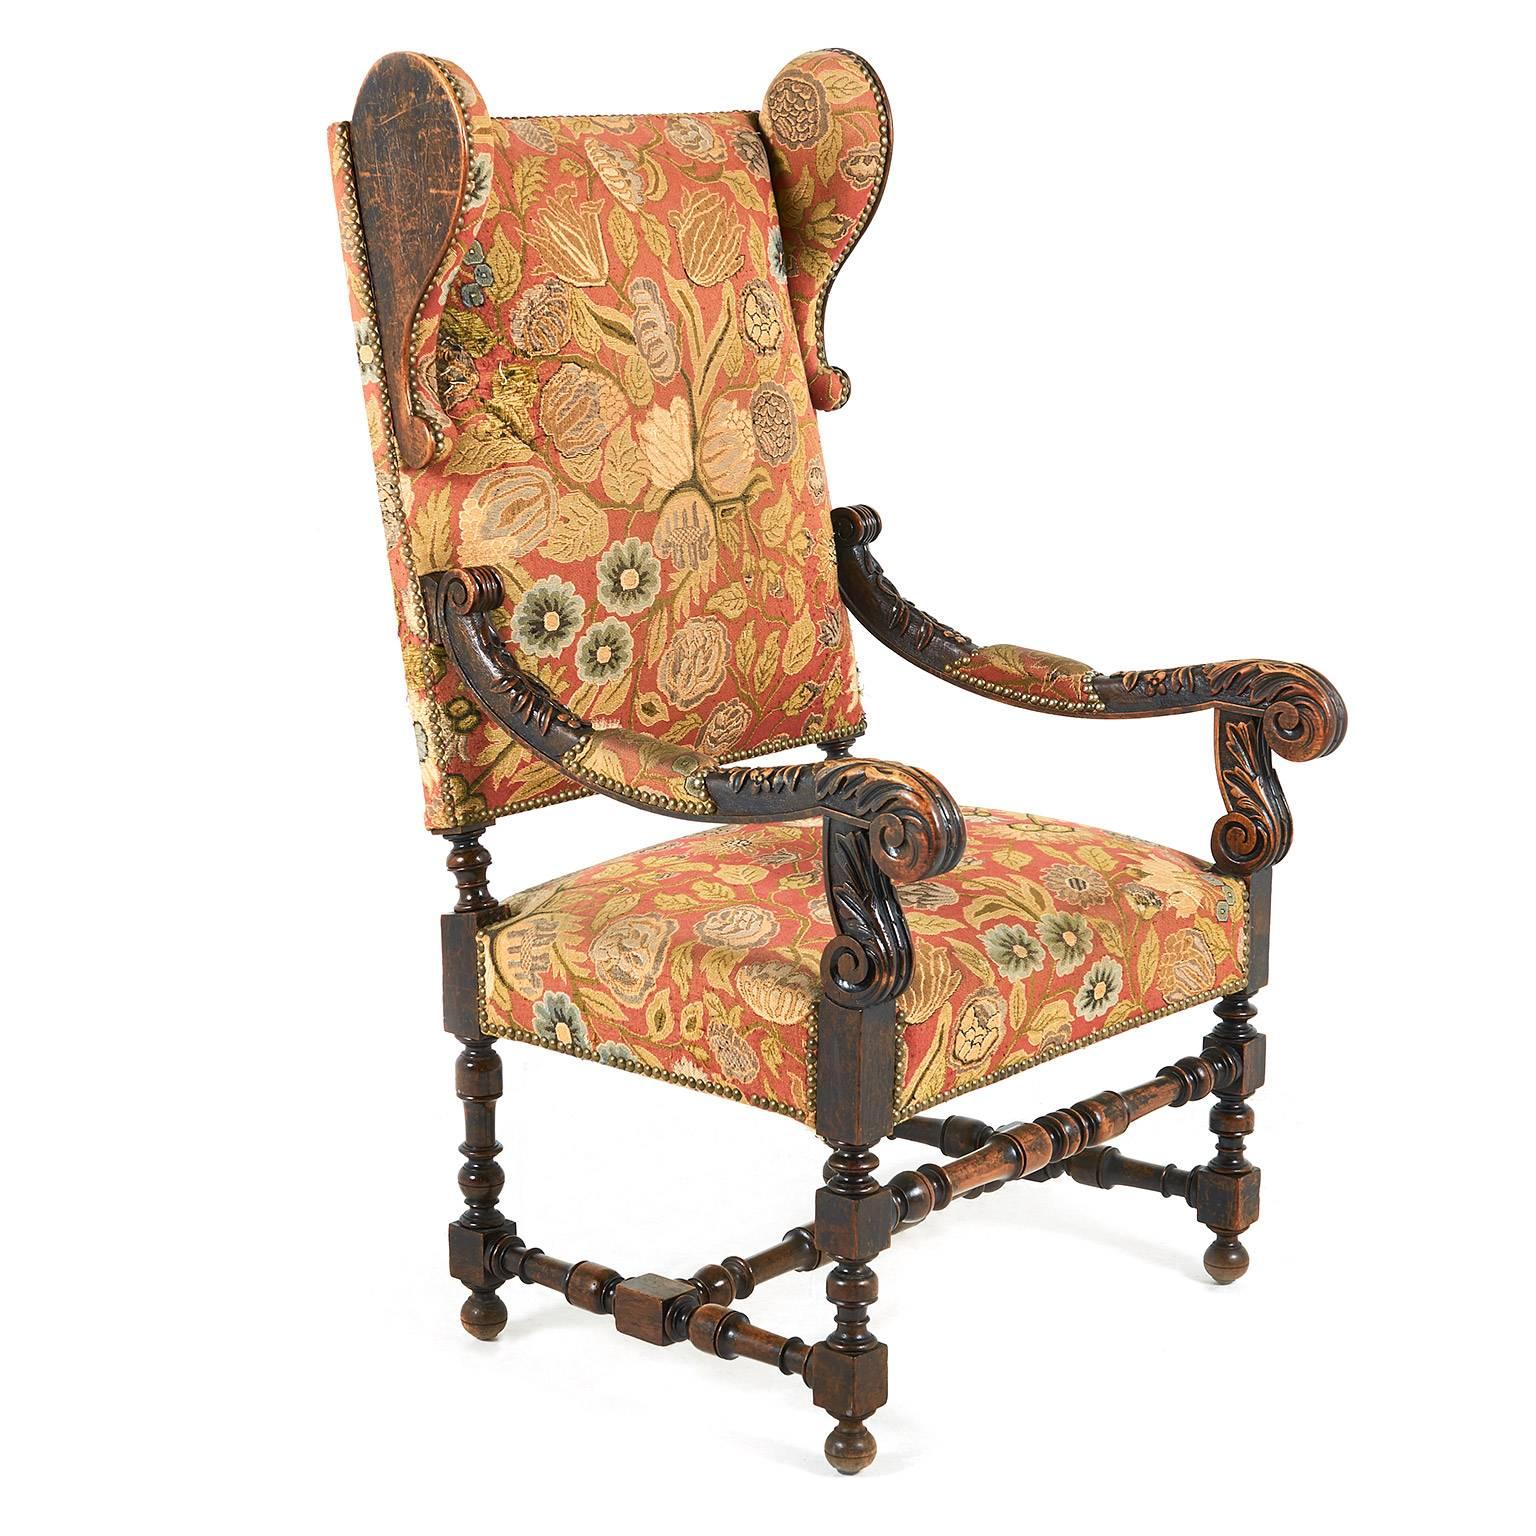 Antique, highly carved, Renaissance Revival-style French wing back chair in oak, circa 1890.

